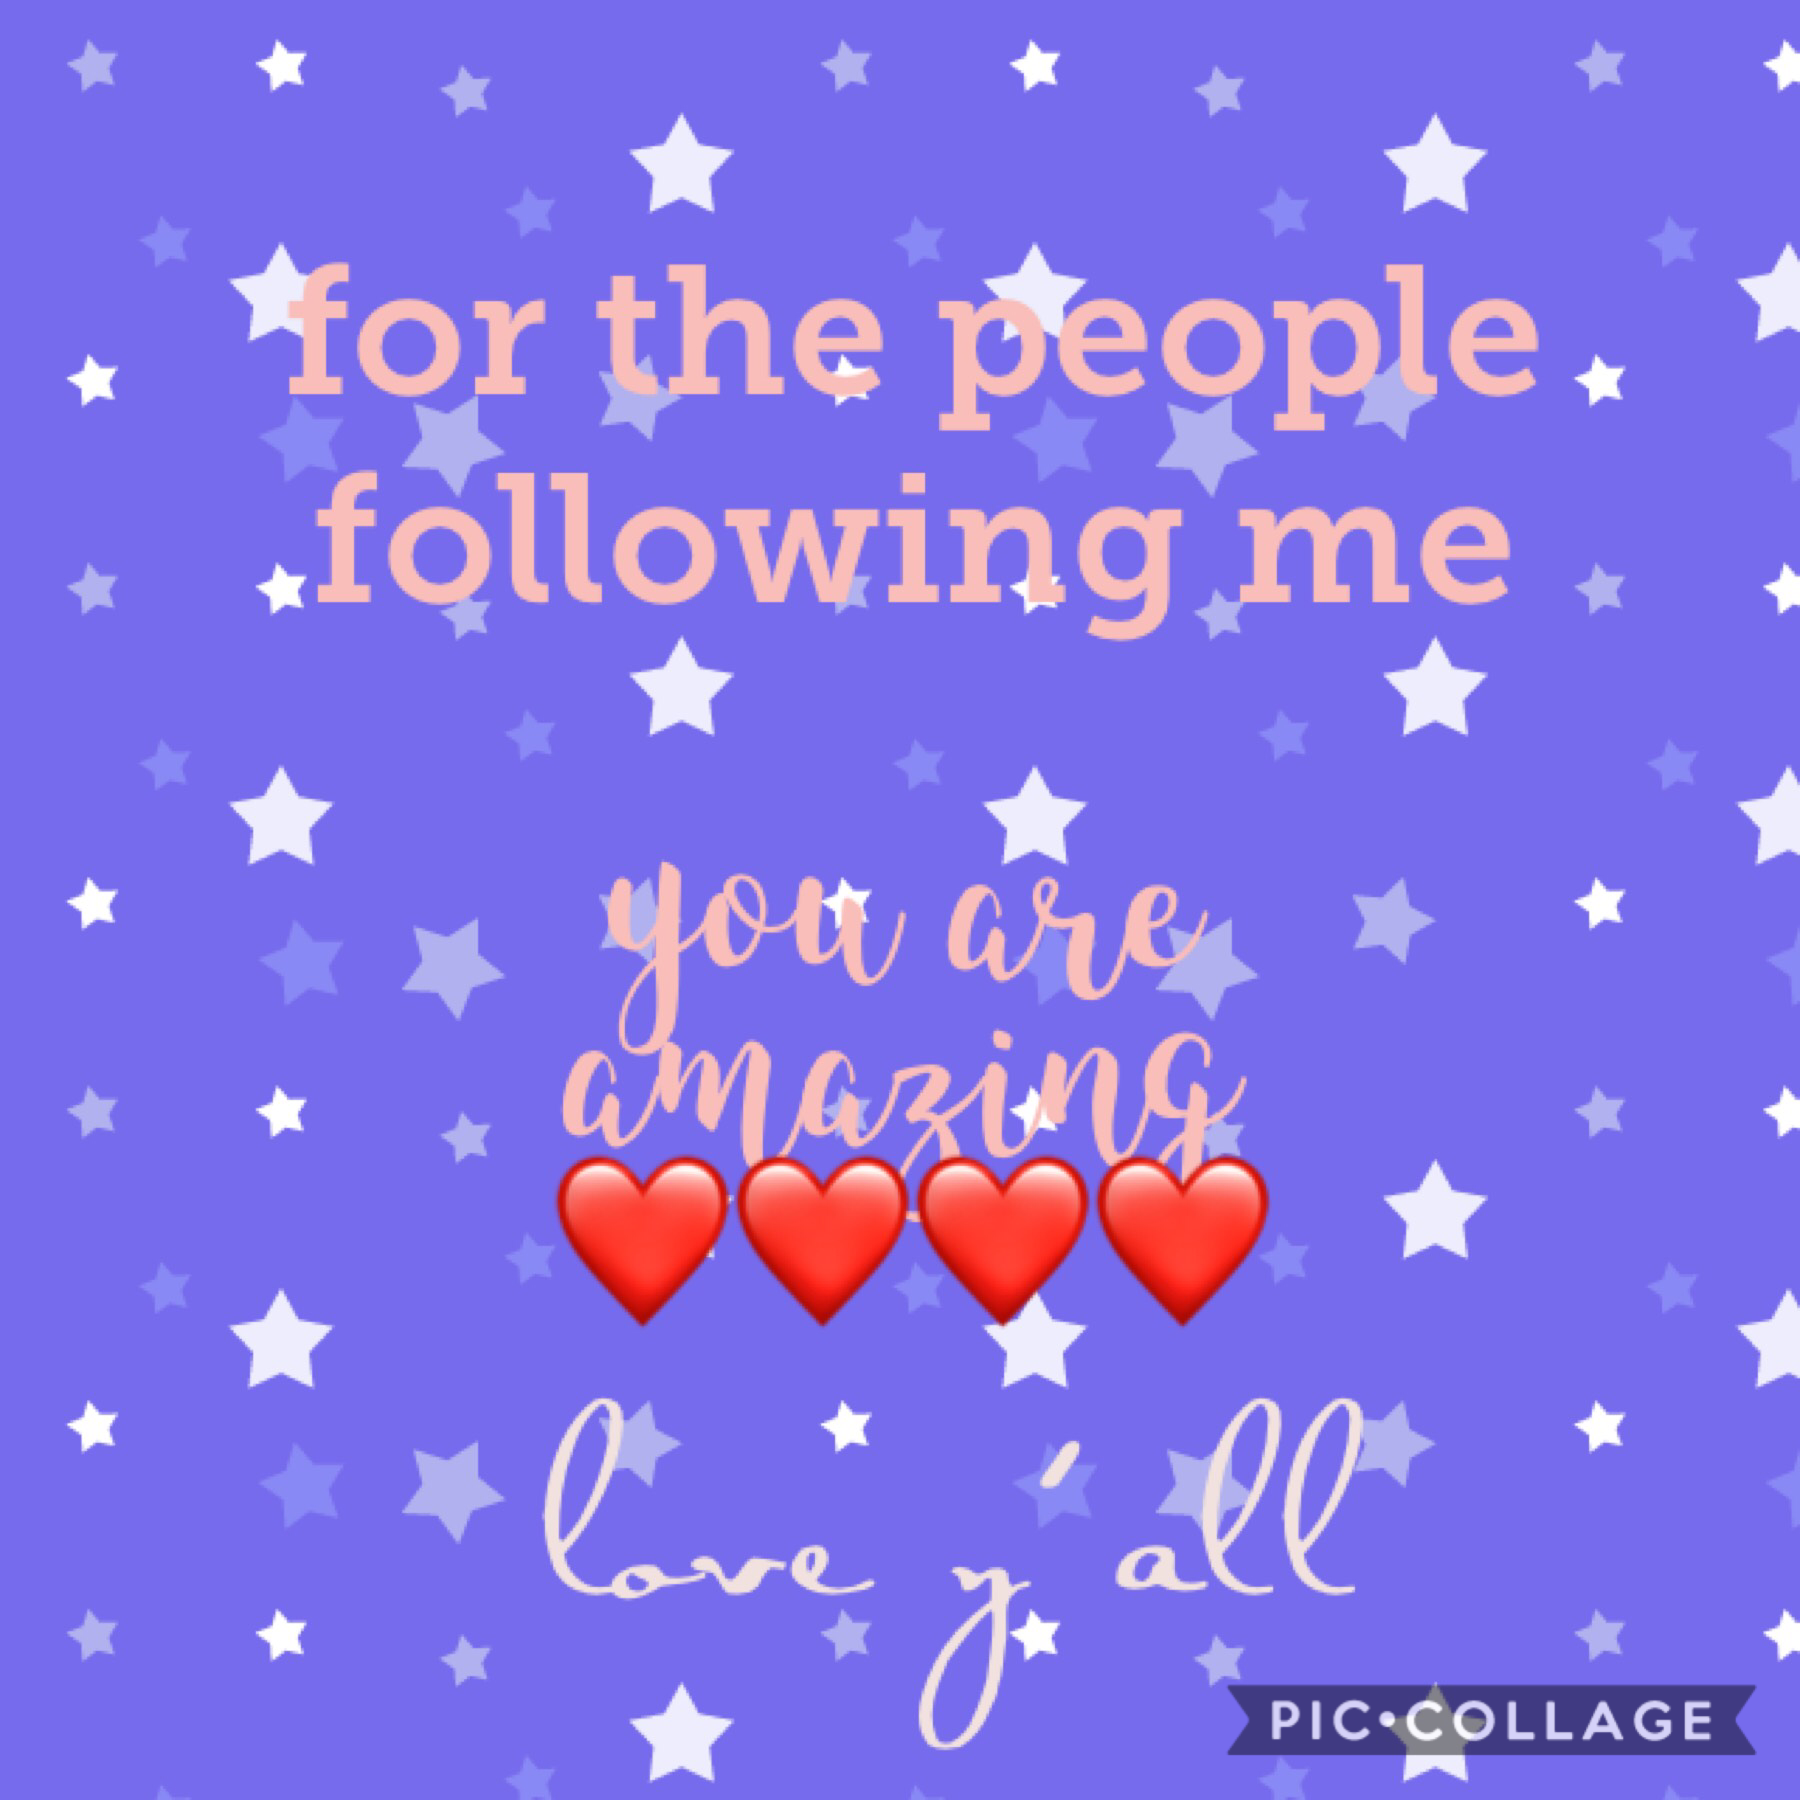 you guys are the best! you know who you are. i really do appreciate y’all!❤️❤️❤️❤️❤️❤️❤️